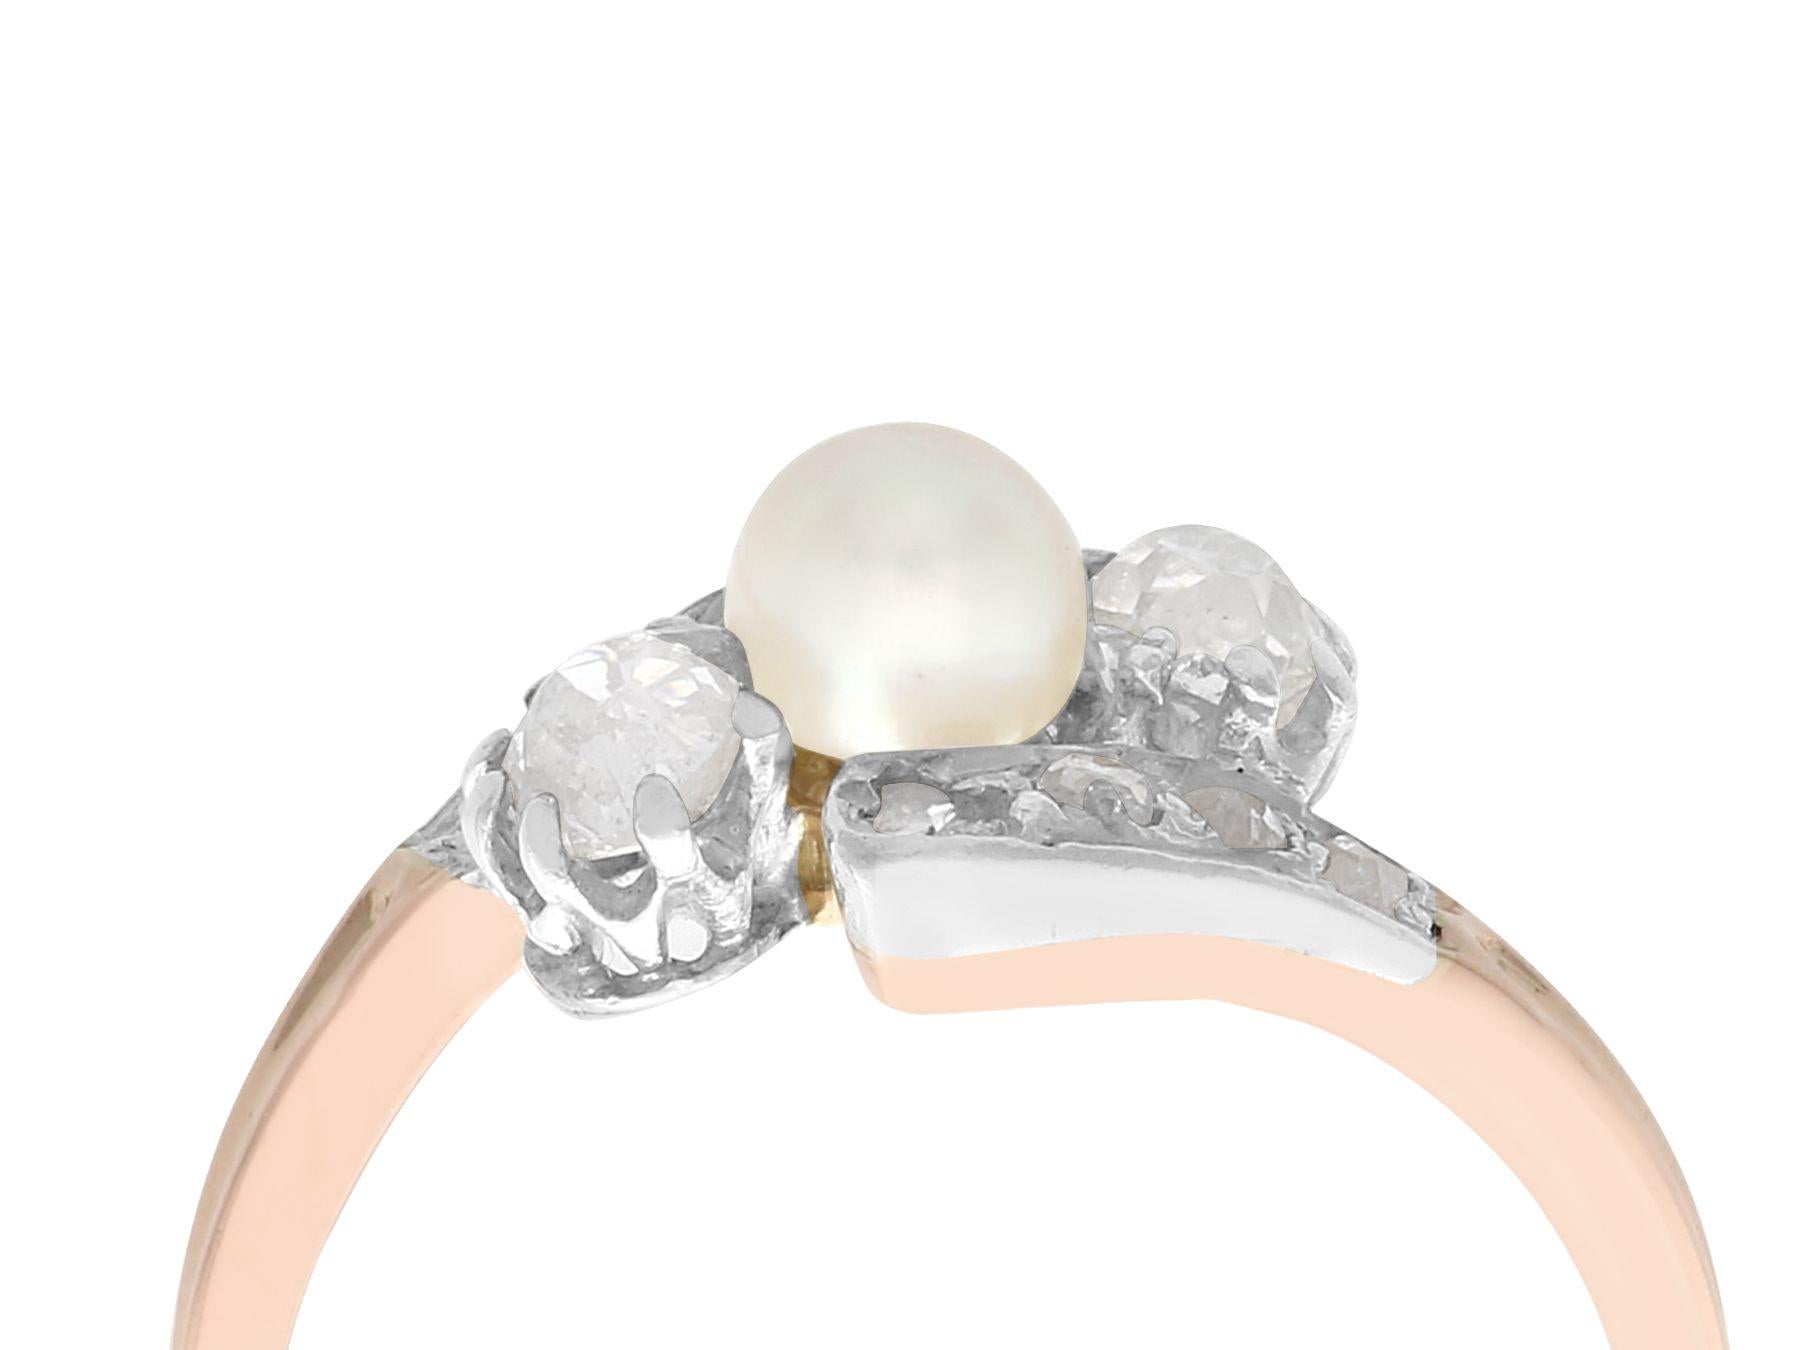 An impressive antique pearl and 0.51 Carot diamond, 18k rose gold and 18k white gold set twist ring; part of our diverse antique jewelry and estate jewelry collections.

This fine and impressive pearl and diamond ring has been crafted in 18k rose